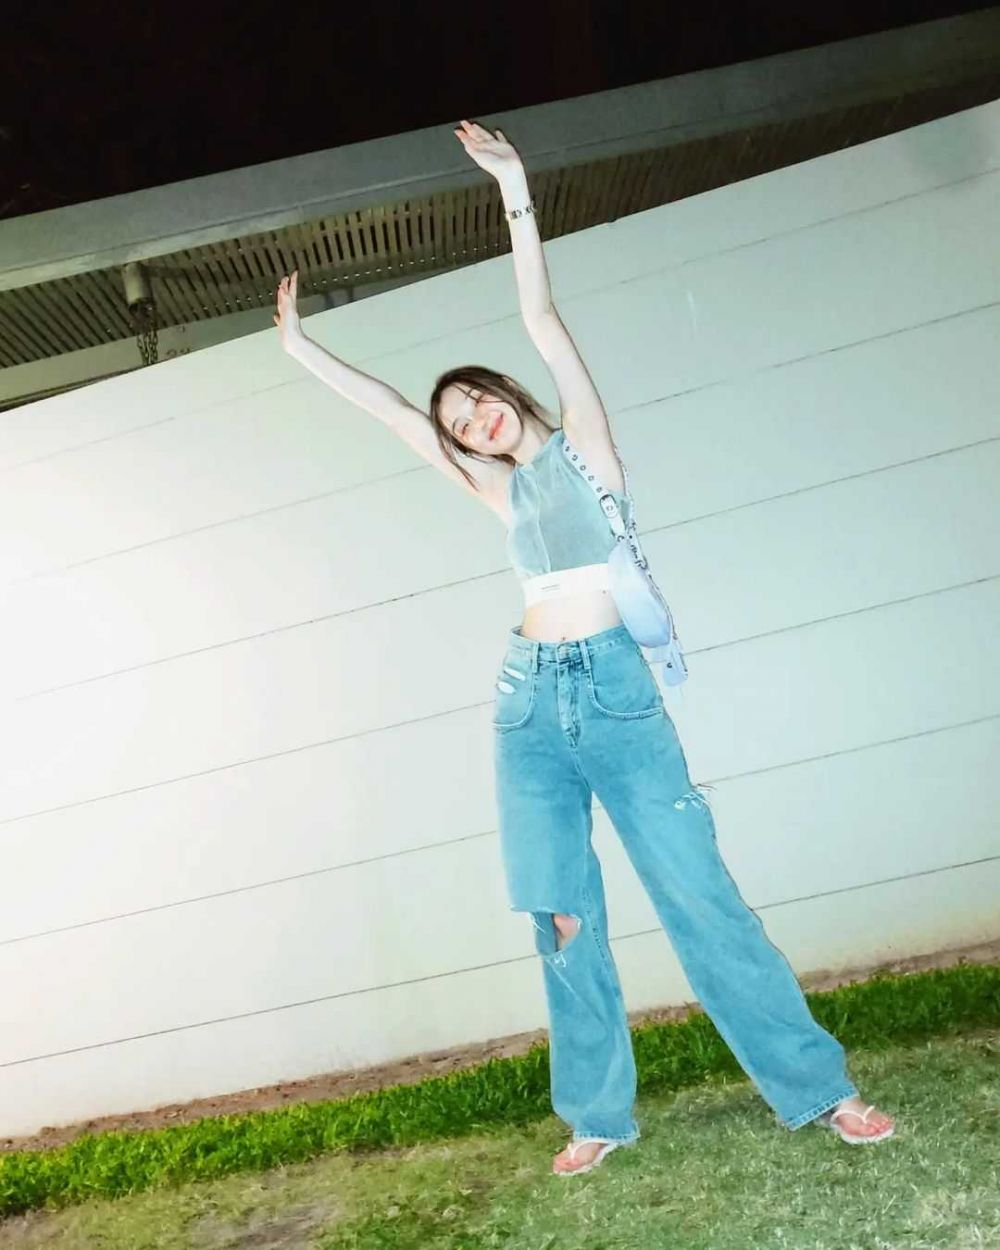 Dominated by Jeans, 10 Outfit Ideas Using Loose Pants by Thai Actress